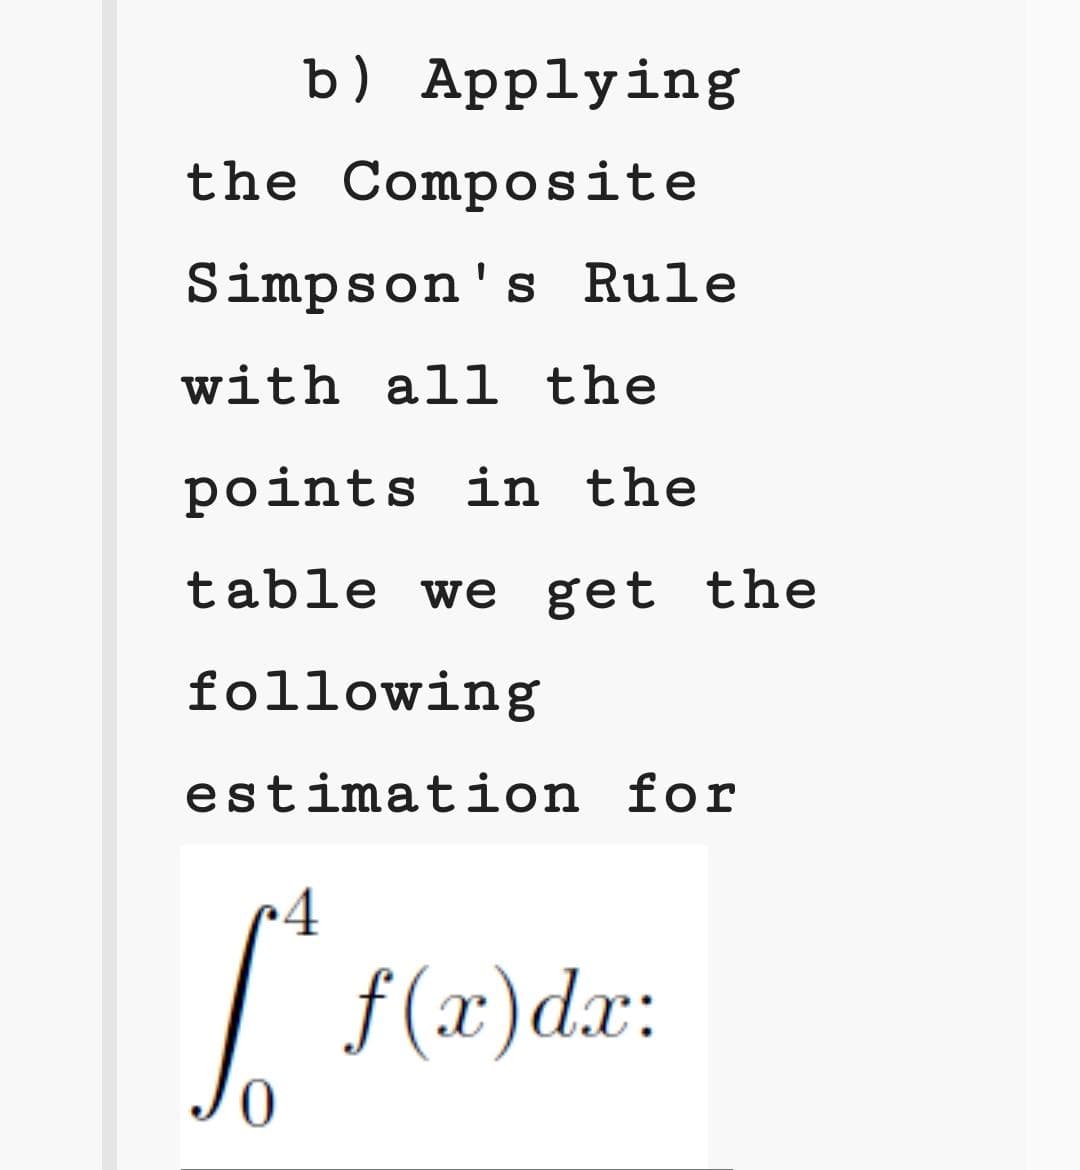 b) Applying
the Composite
Simpson's Rule
with all the
points in the
table we get the
following
estimation for
|
f (x)dx:
